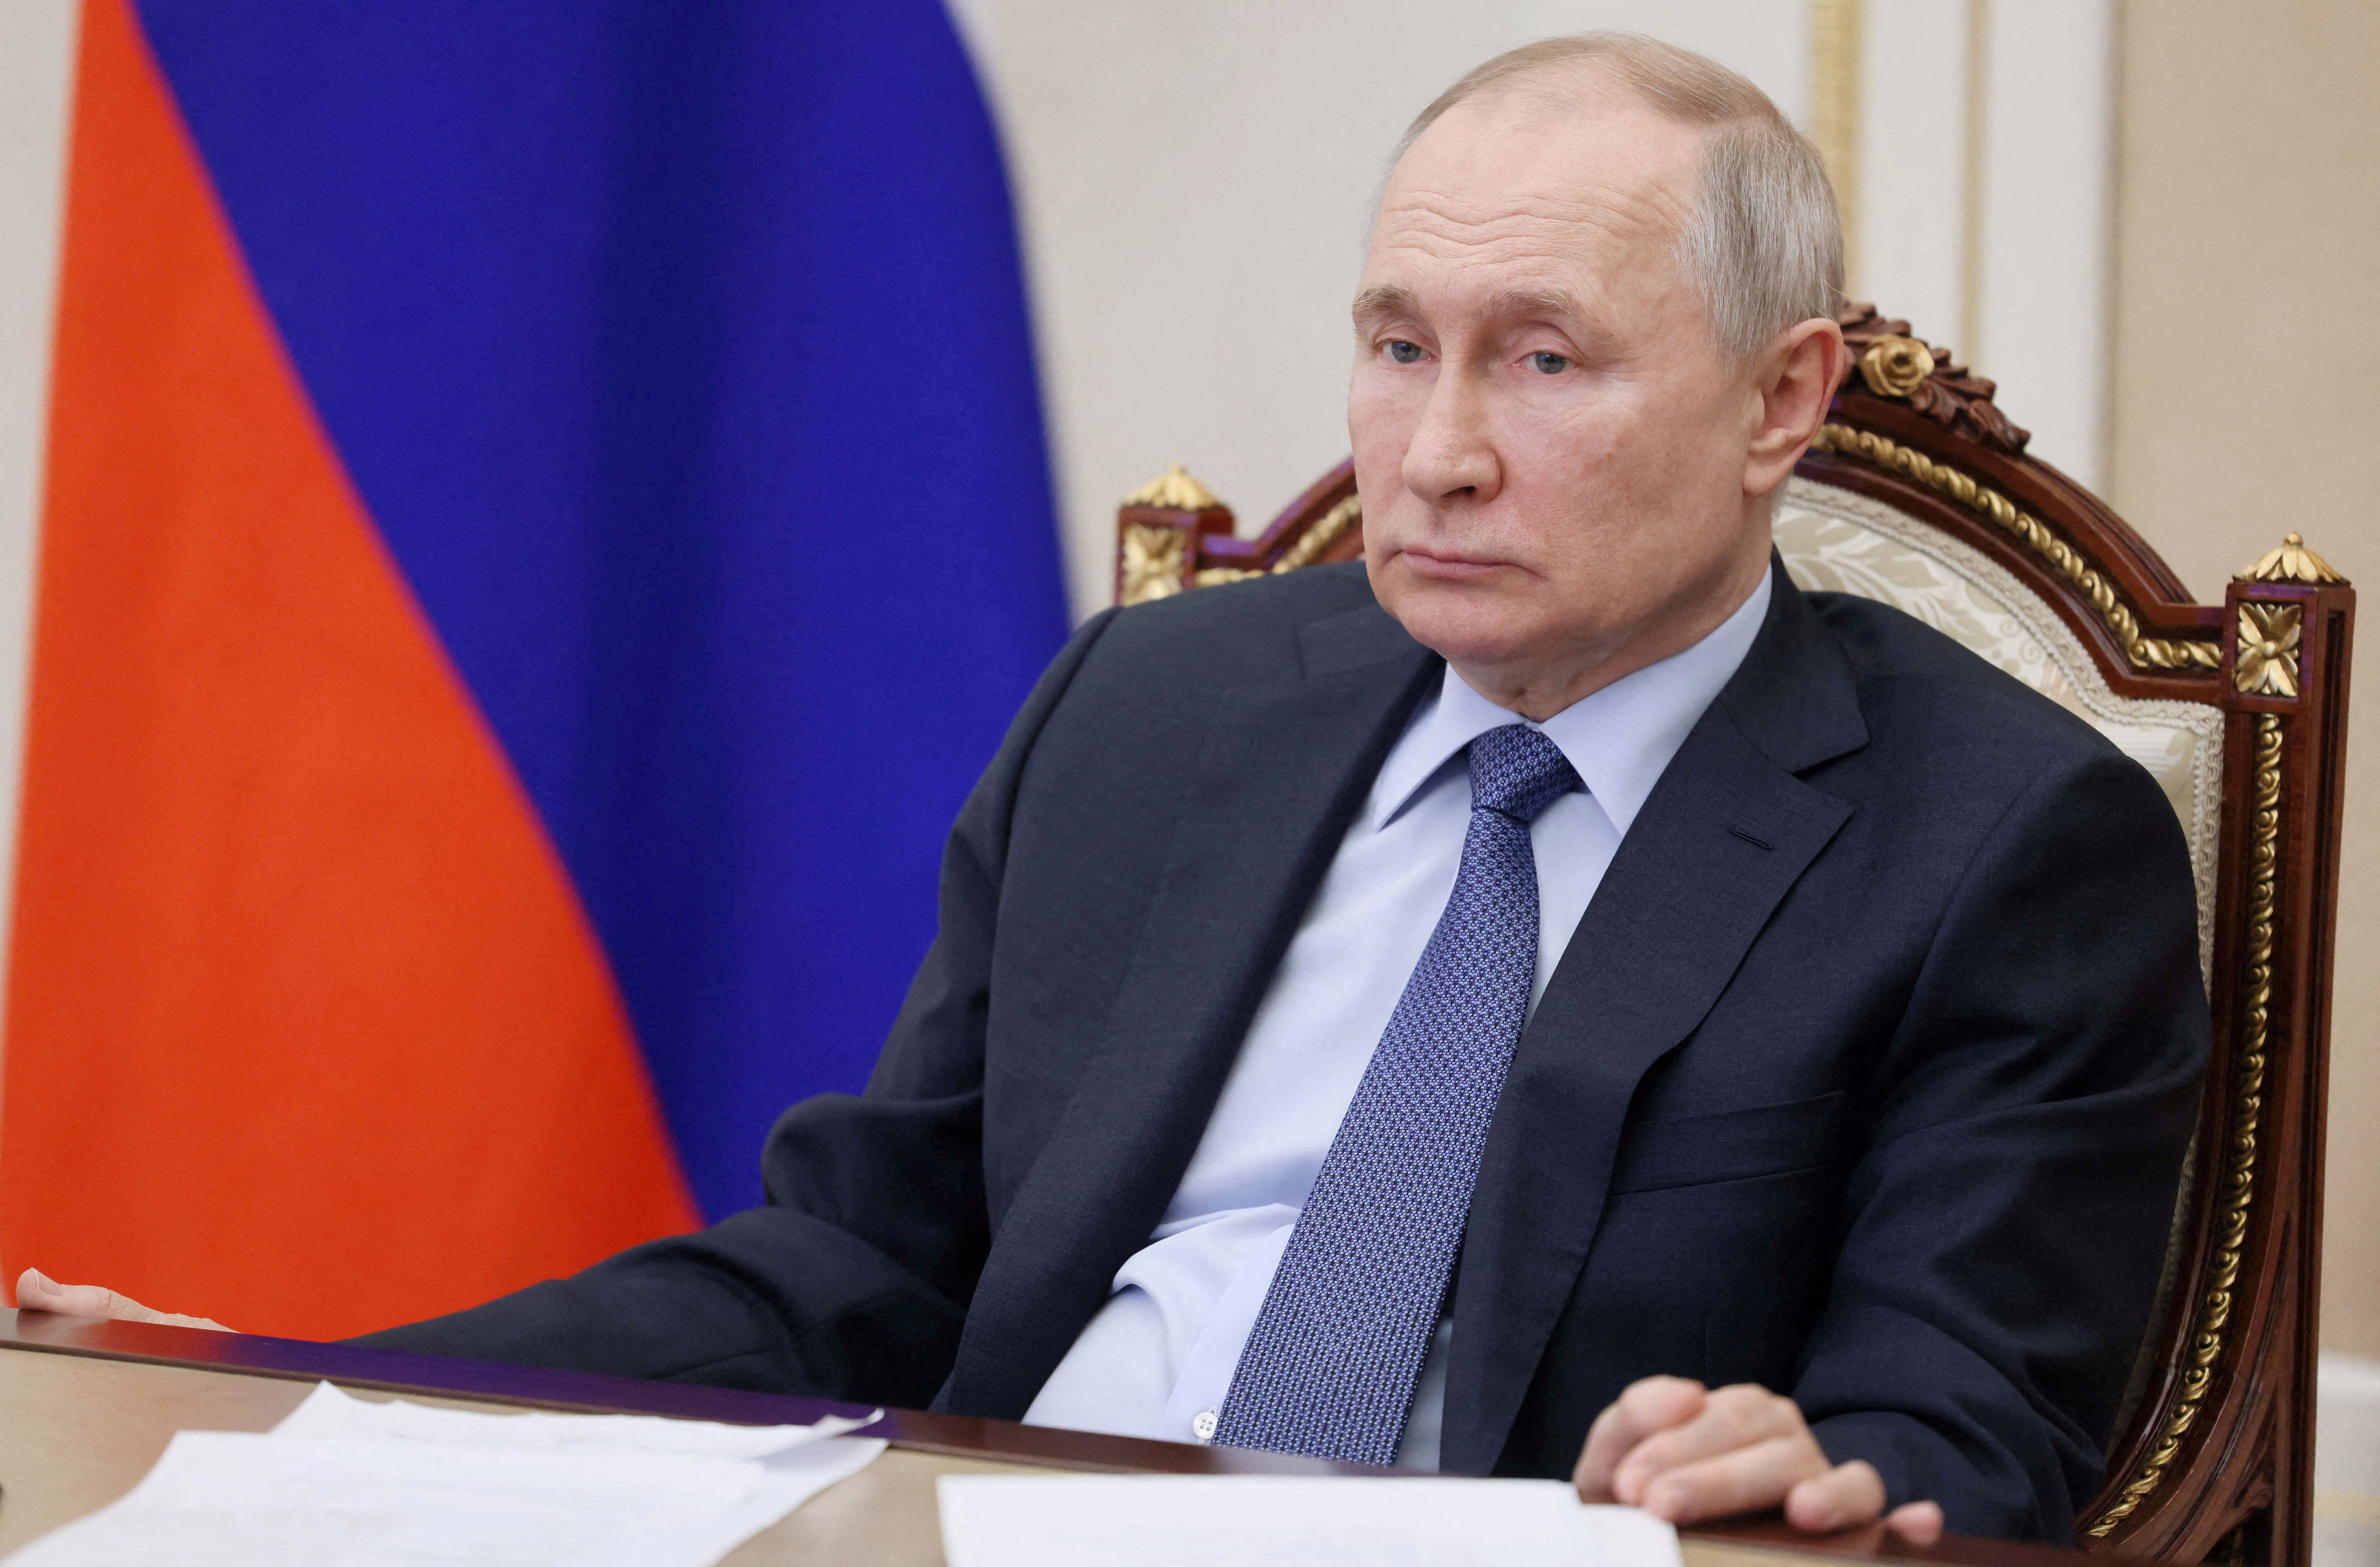 FILE PHOTO: Russian President Vladimir Putin chairs a meeting on the social and economic development of Crimea and Sevastopol, via videolink in Moscow, Russia March 17, 2023 Sputnik/Mikhail Metzel/Pool via REUTERS/File Photo ATTENTION EDITORS - THIS IMAGE WAS PROVIDED BY A THIRD PARTY